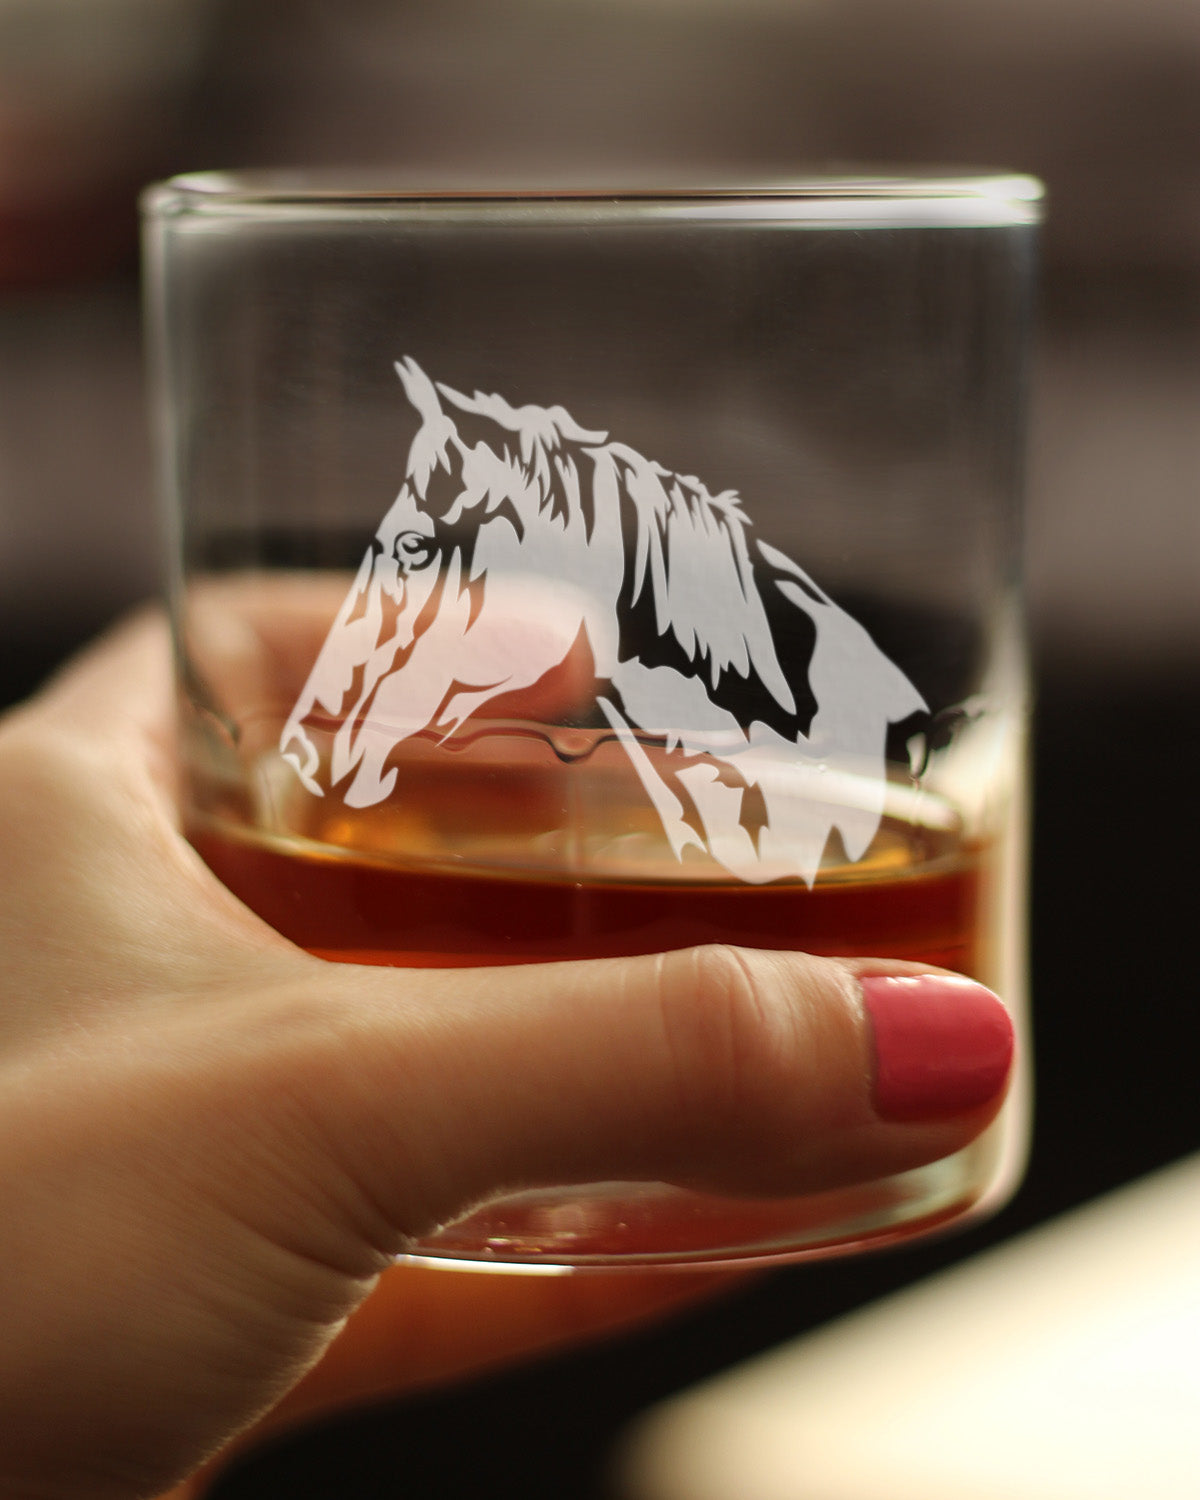 Horse Face Whiskey Rocks Glass - Western Themed Farm Decor and Gifts for Horseback Riders - 10.25 Oz Glasses